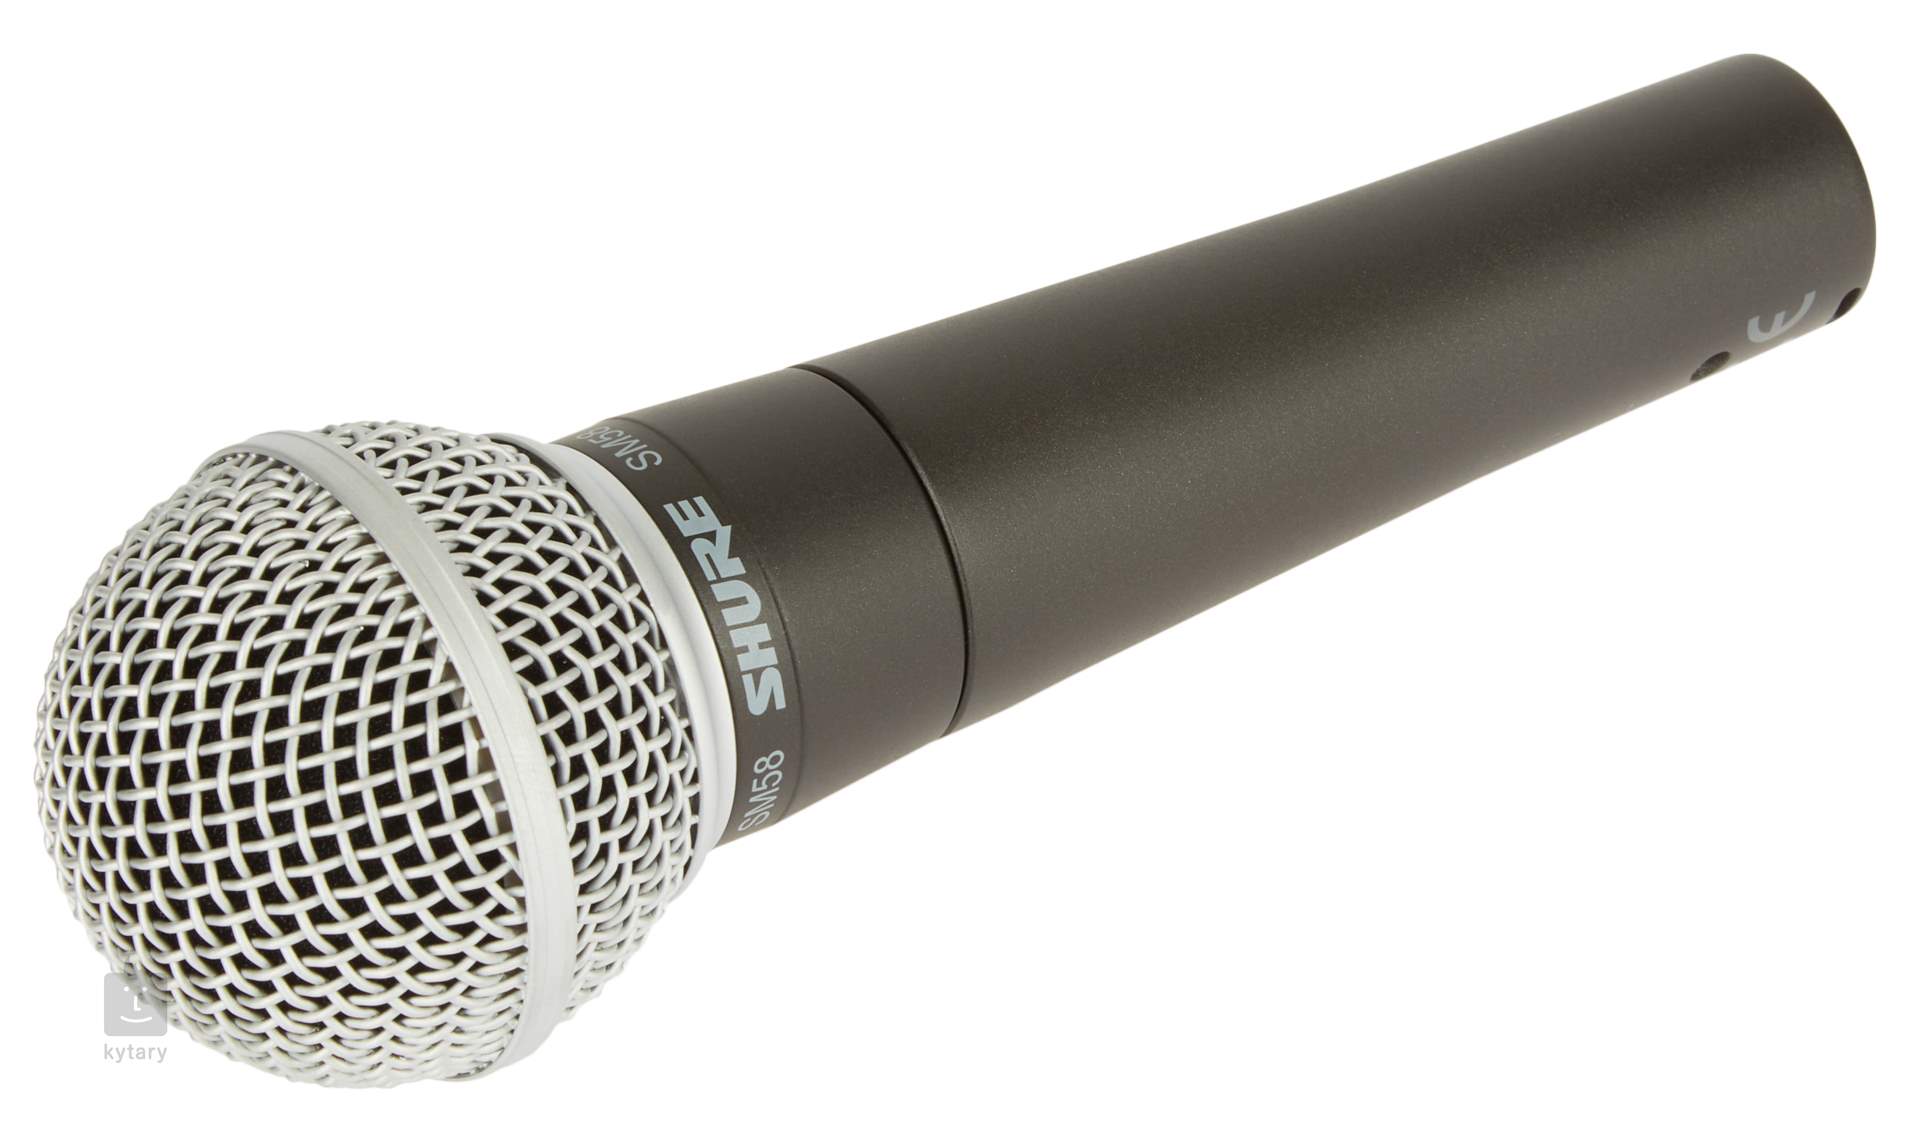 SHURE SM58 LCE Dynamic Microphone | Kytary.ie